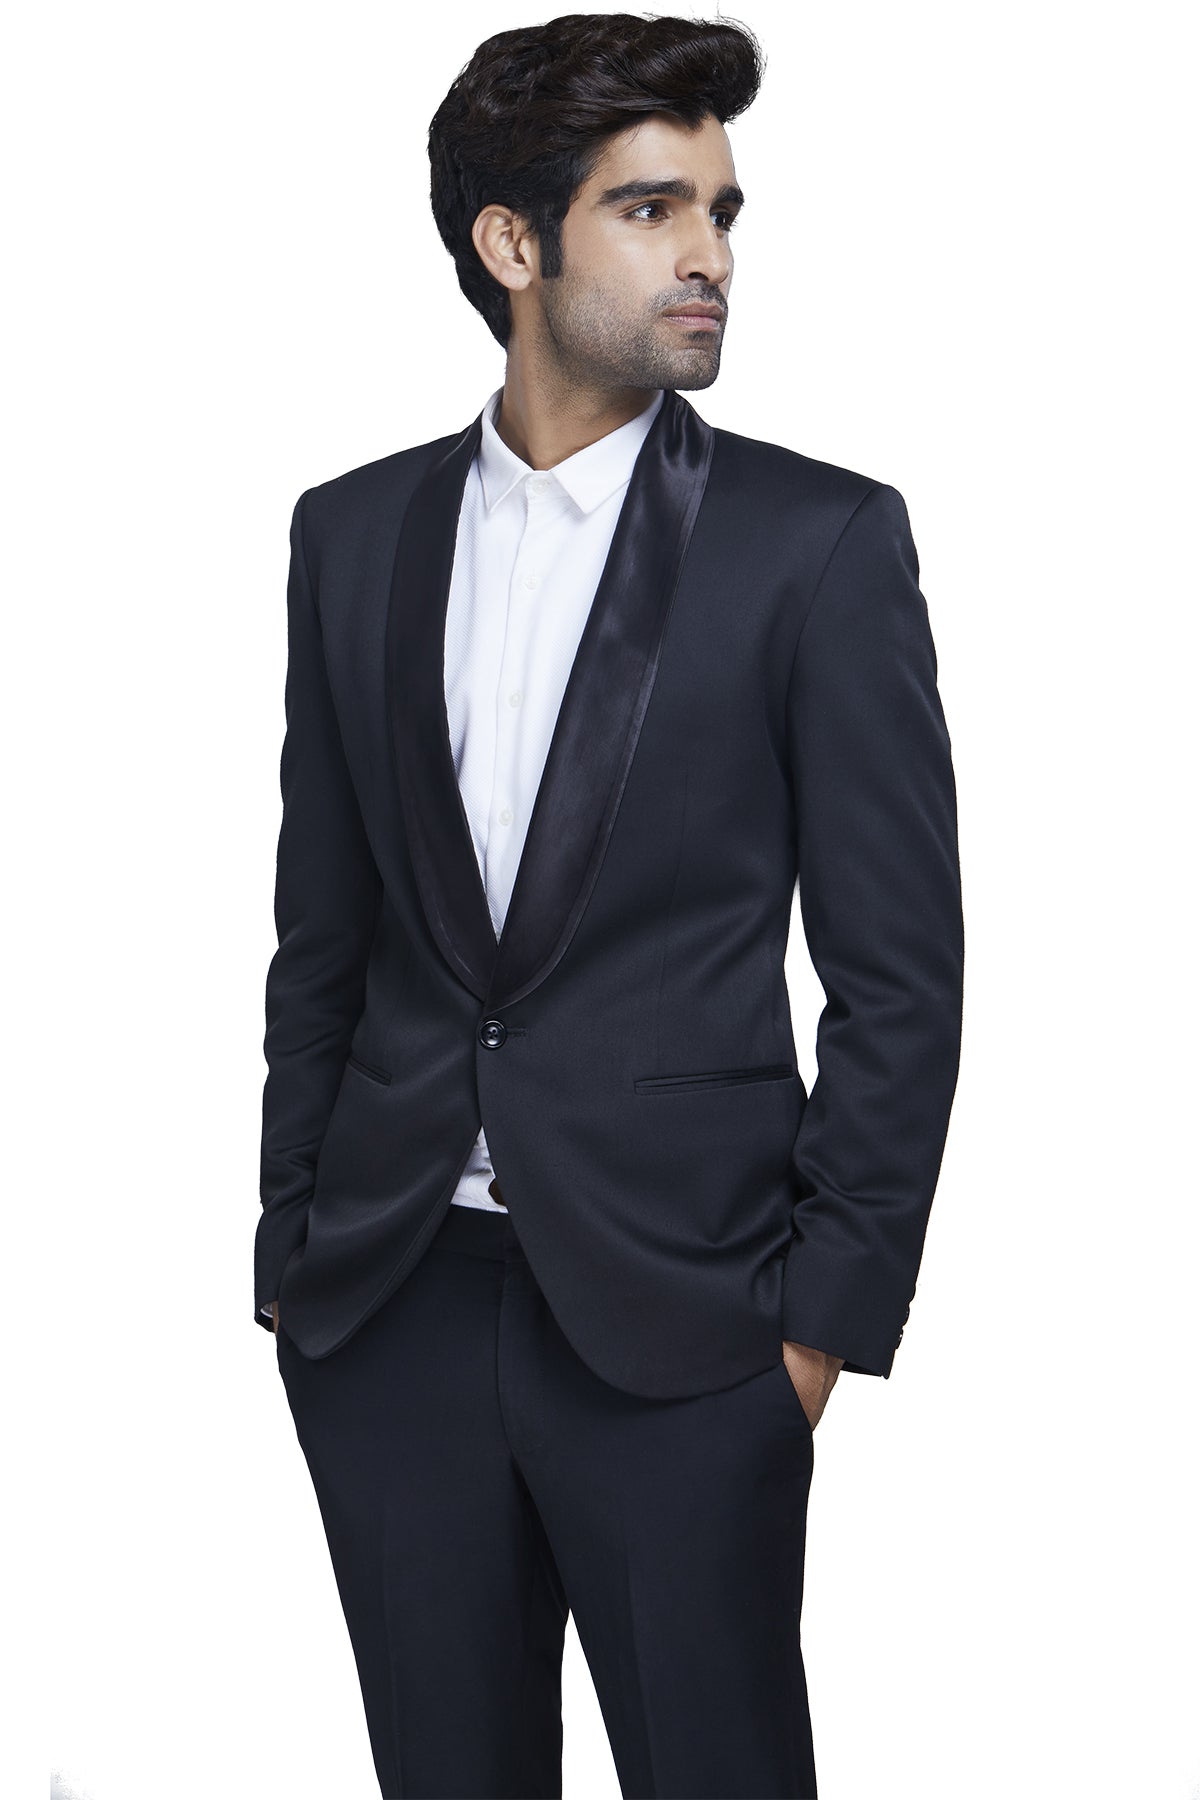 Black dinner suit with satin rounded lapels